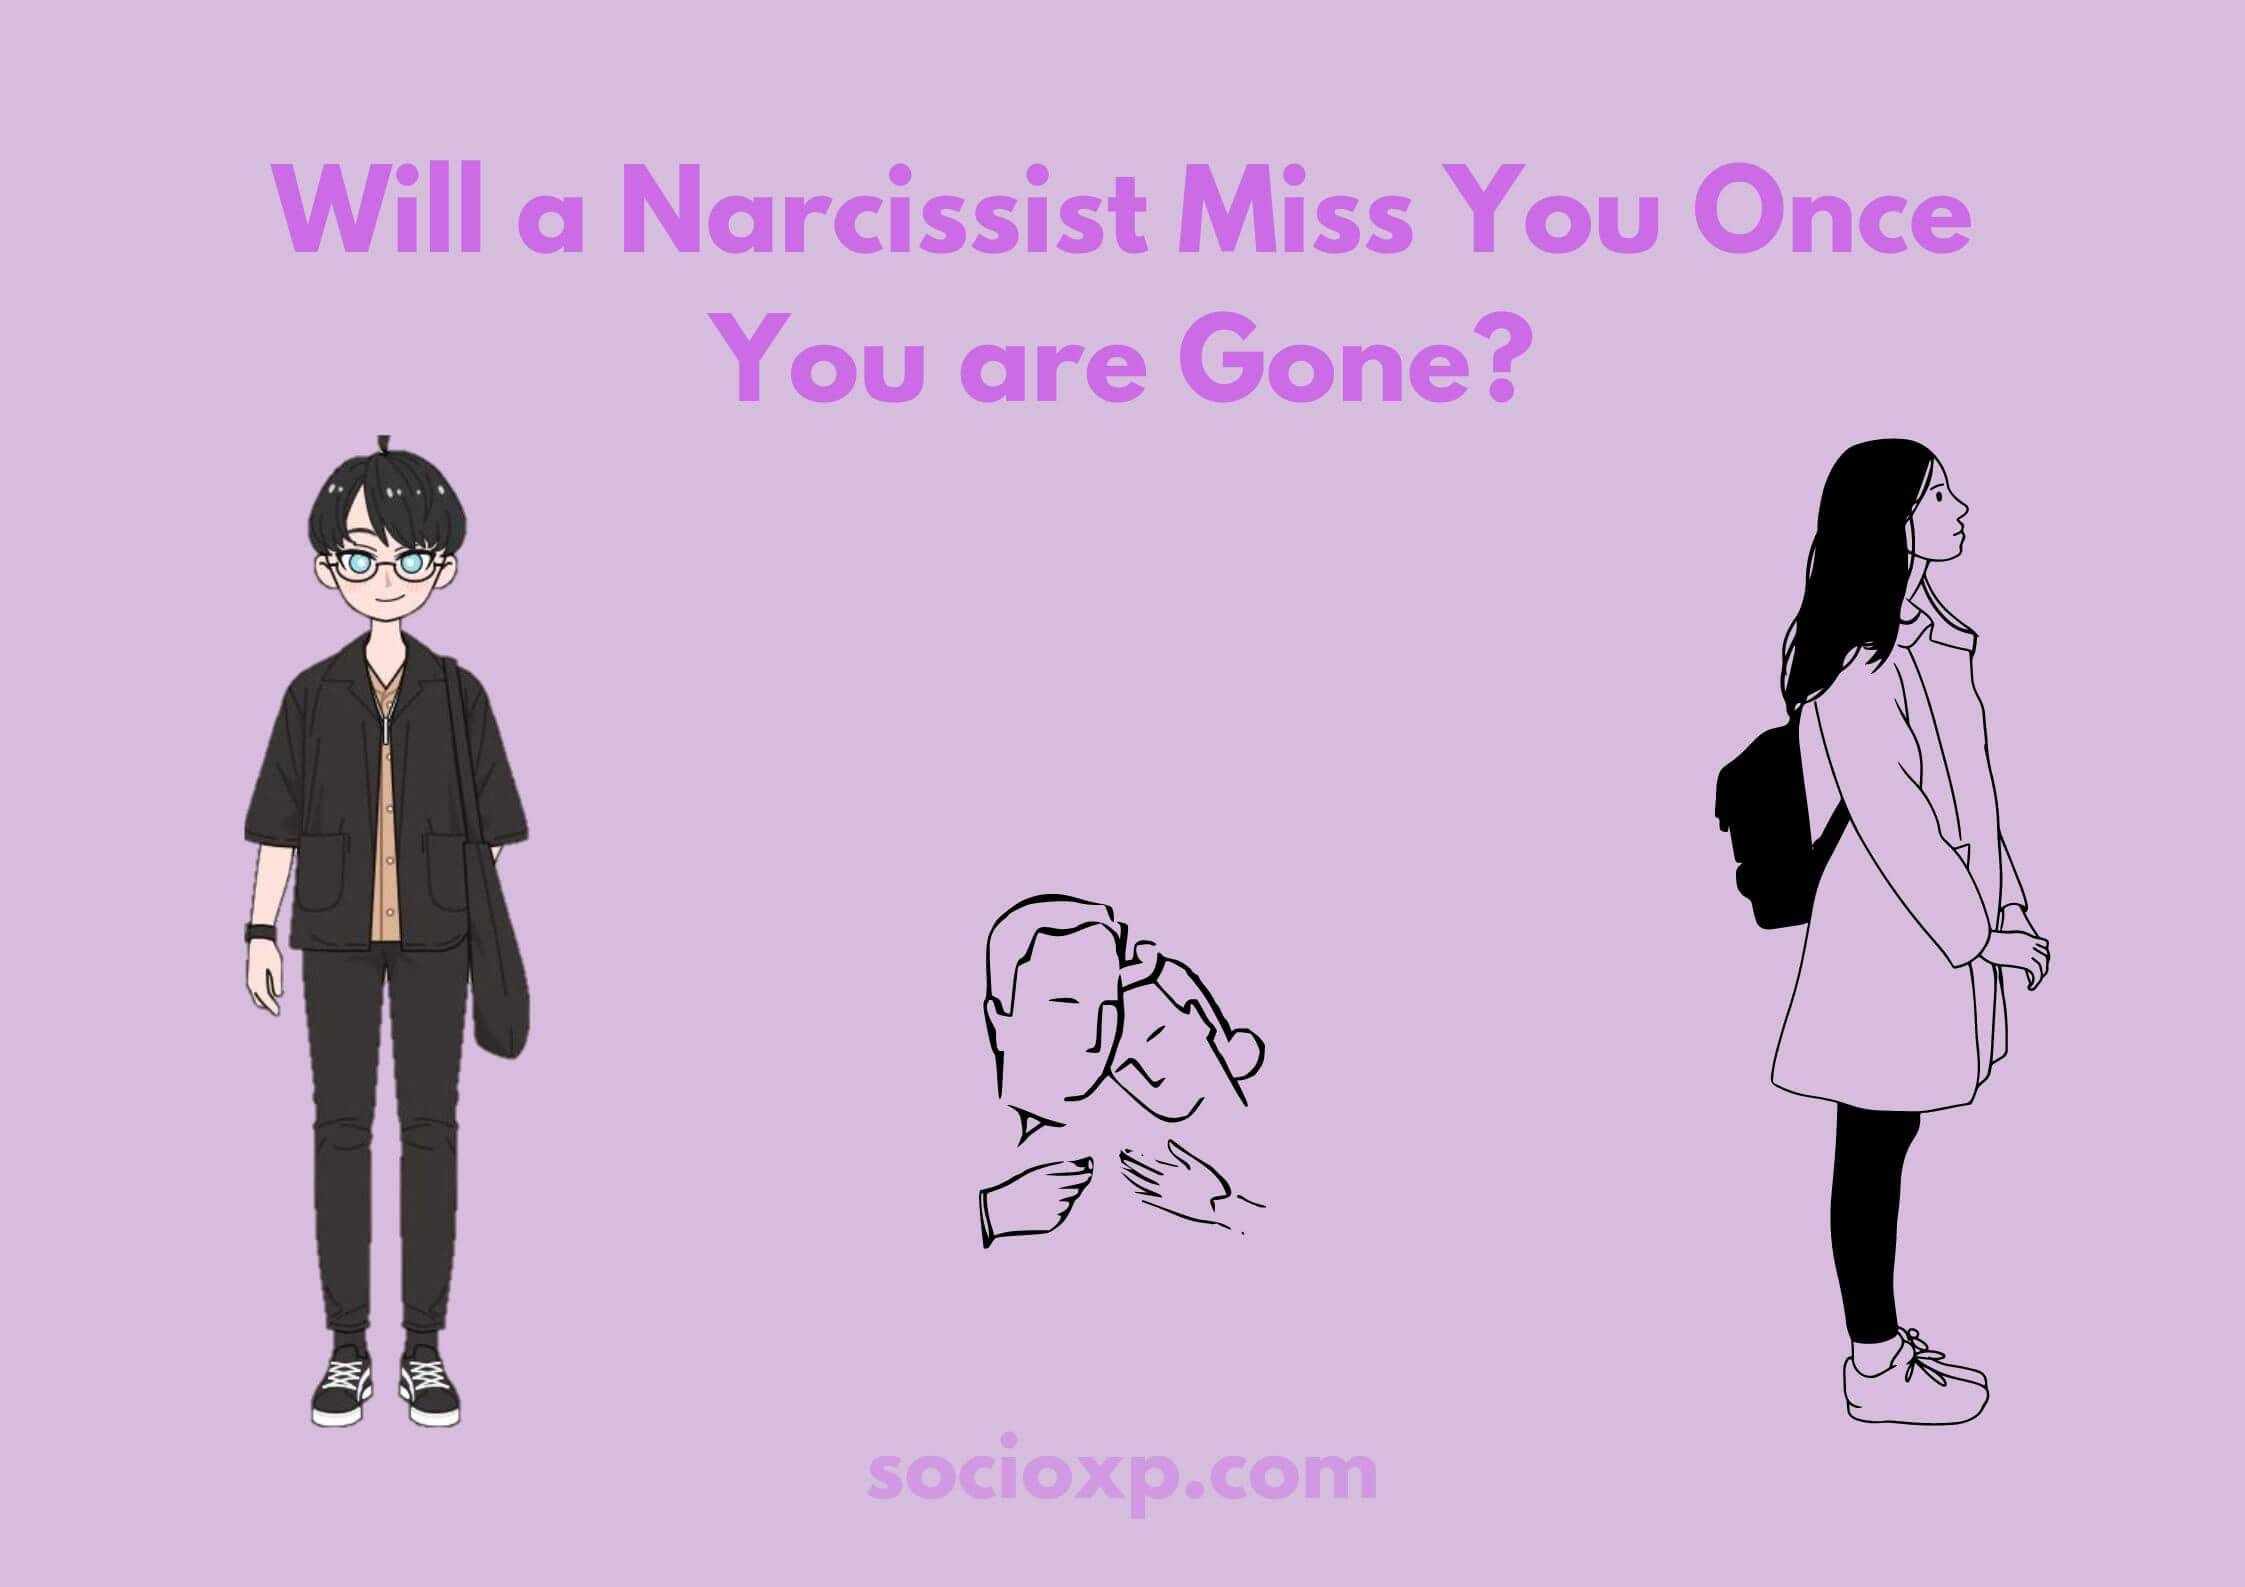 Will a Narcissist Miss You Once You are Gone?